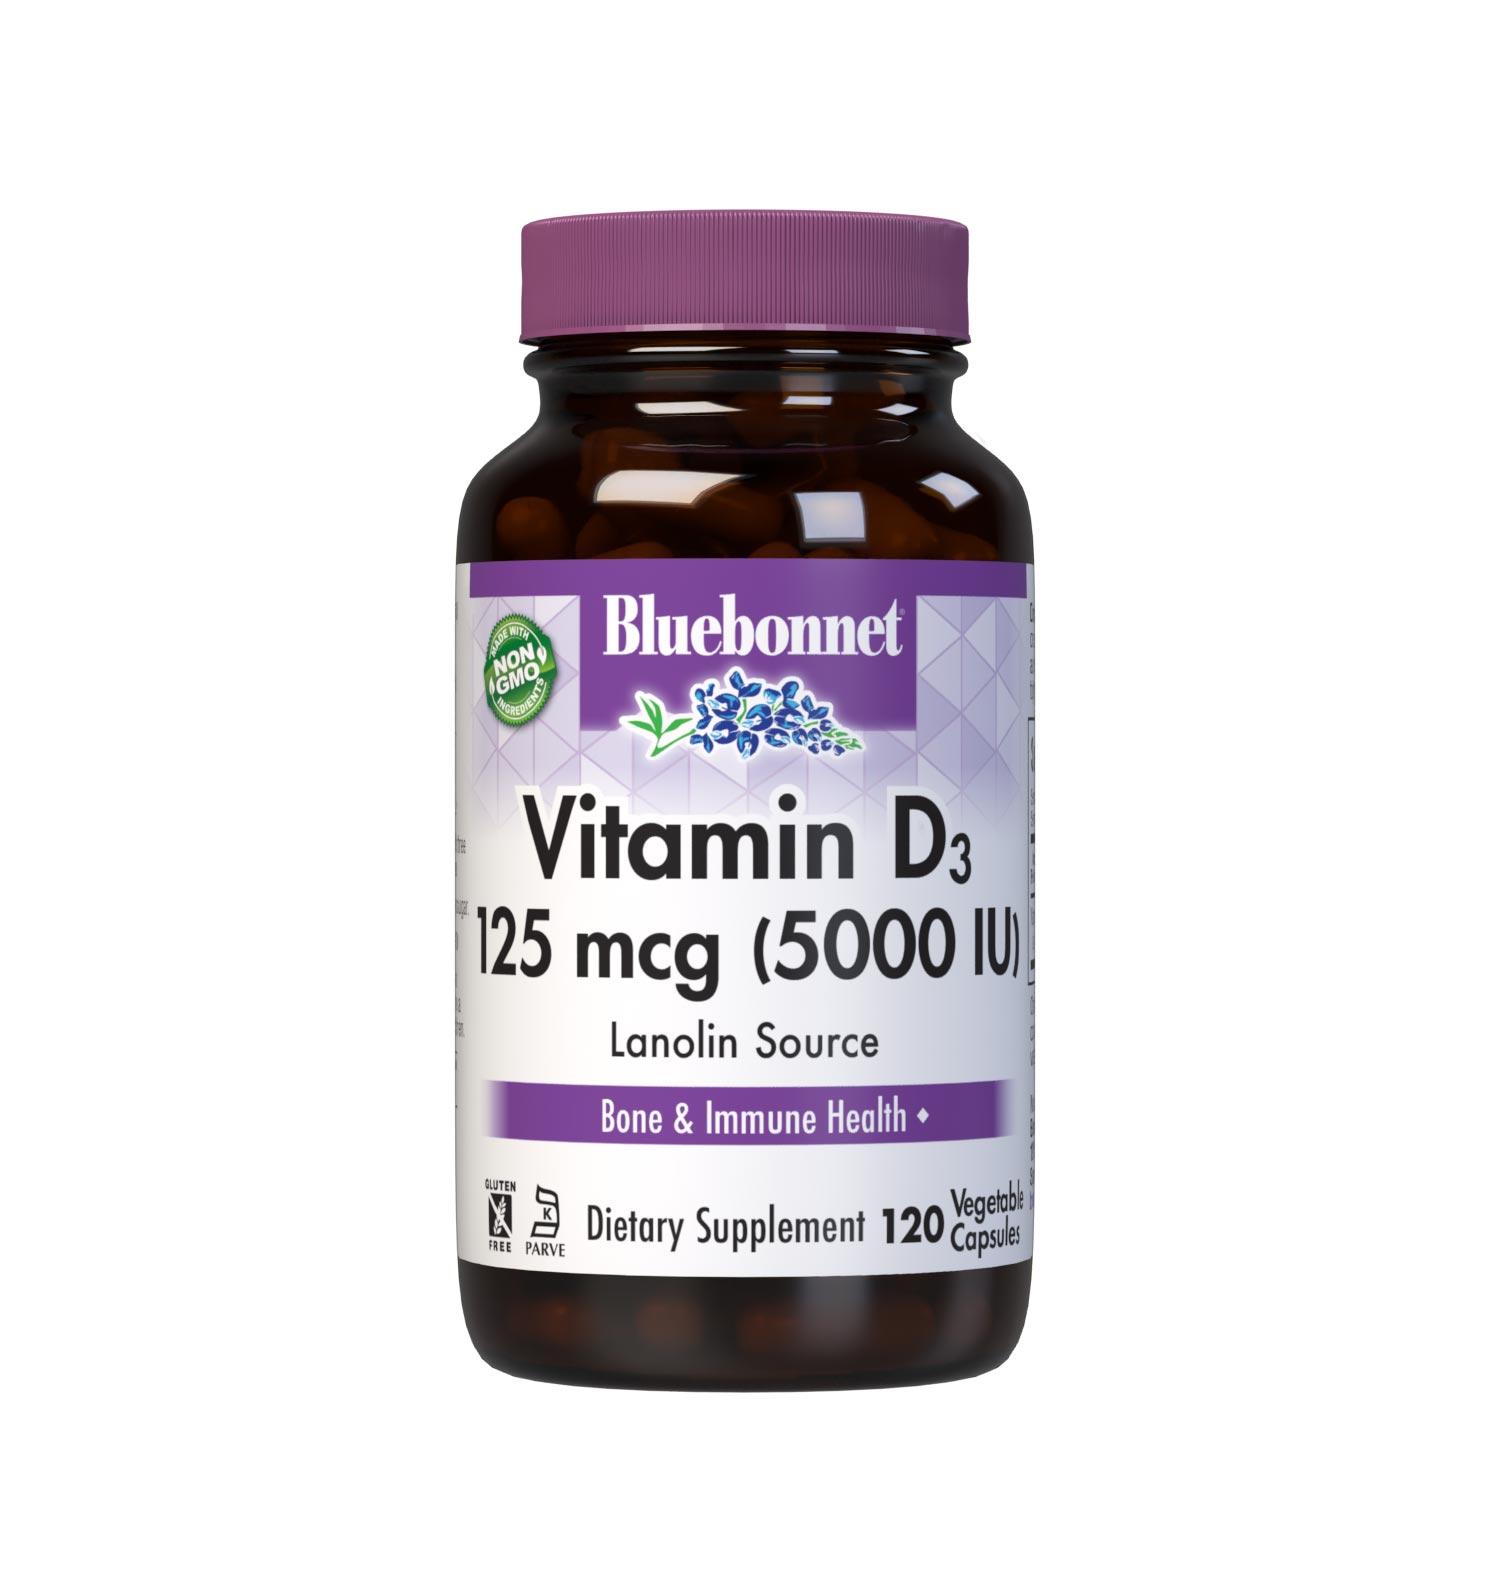 Bluebonnet’s EarthSweet Chewables Vitamin D3 5000 IU (125 mcg) 60 vegetable capsules are formulated with vitamin D3 (cholecalciferol) from lanolin that supports strong bones and immune function. #size_120 count